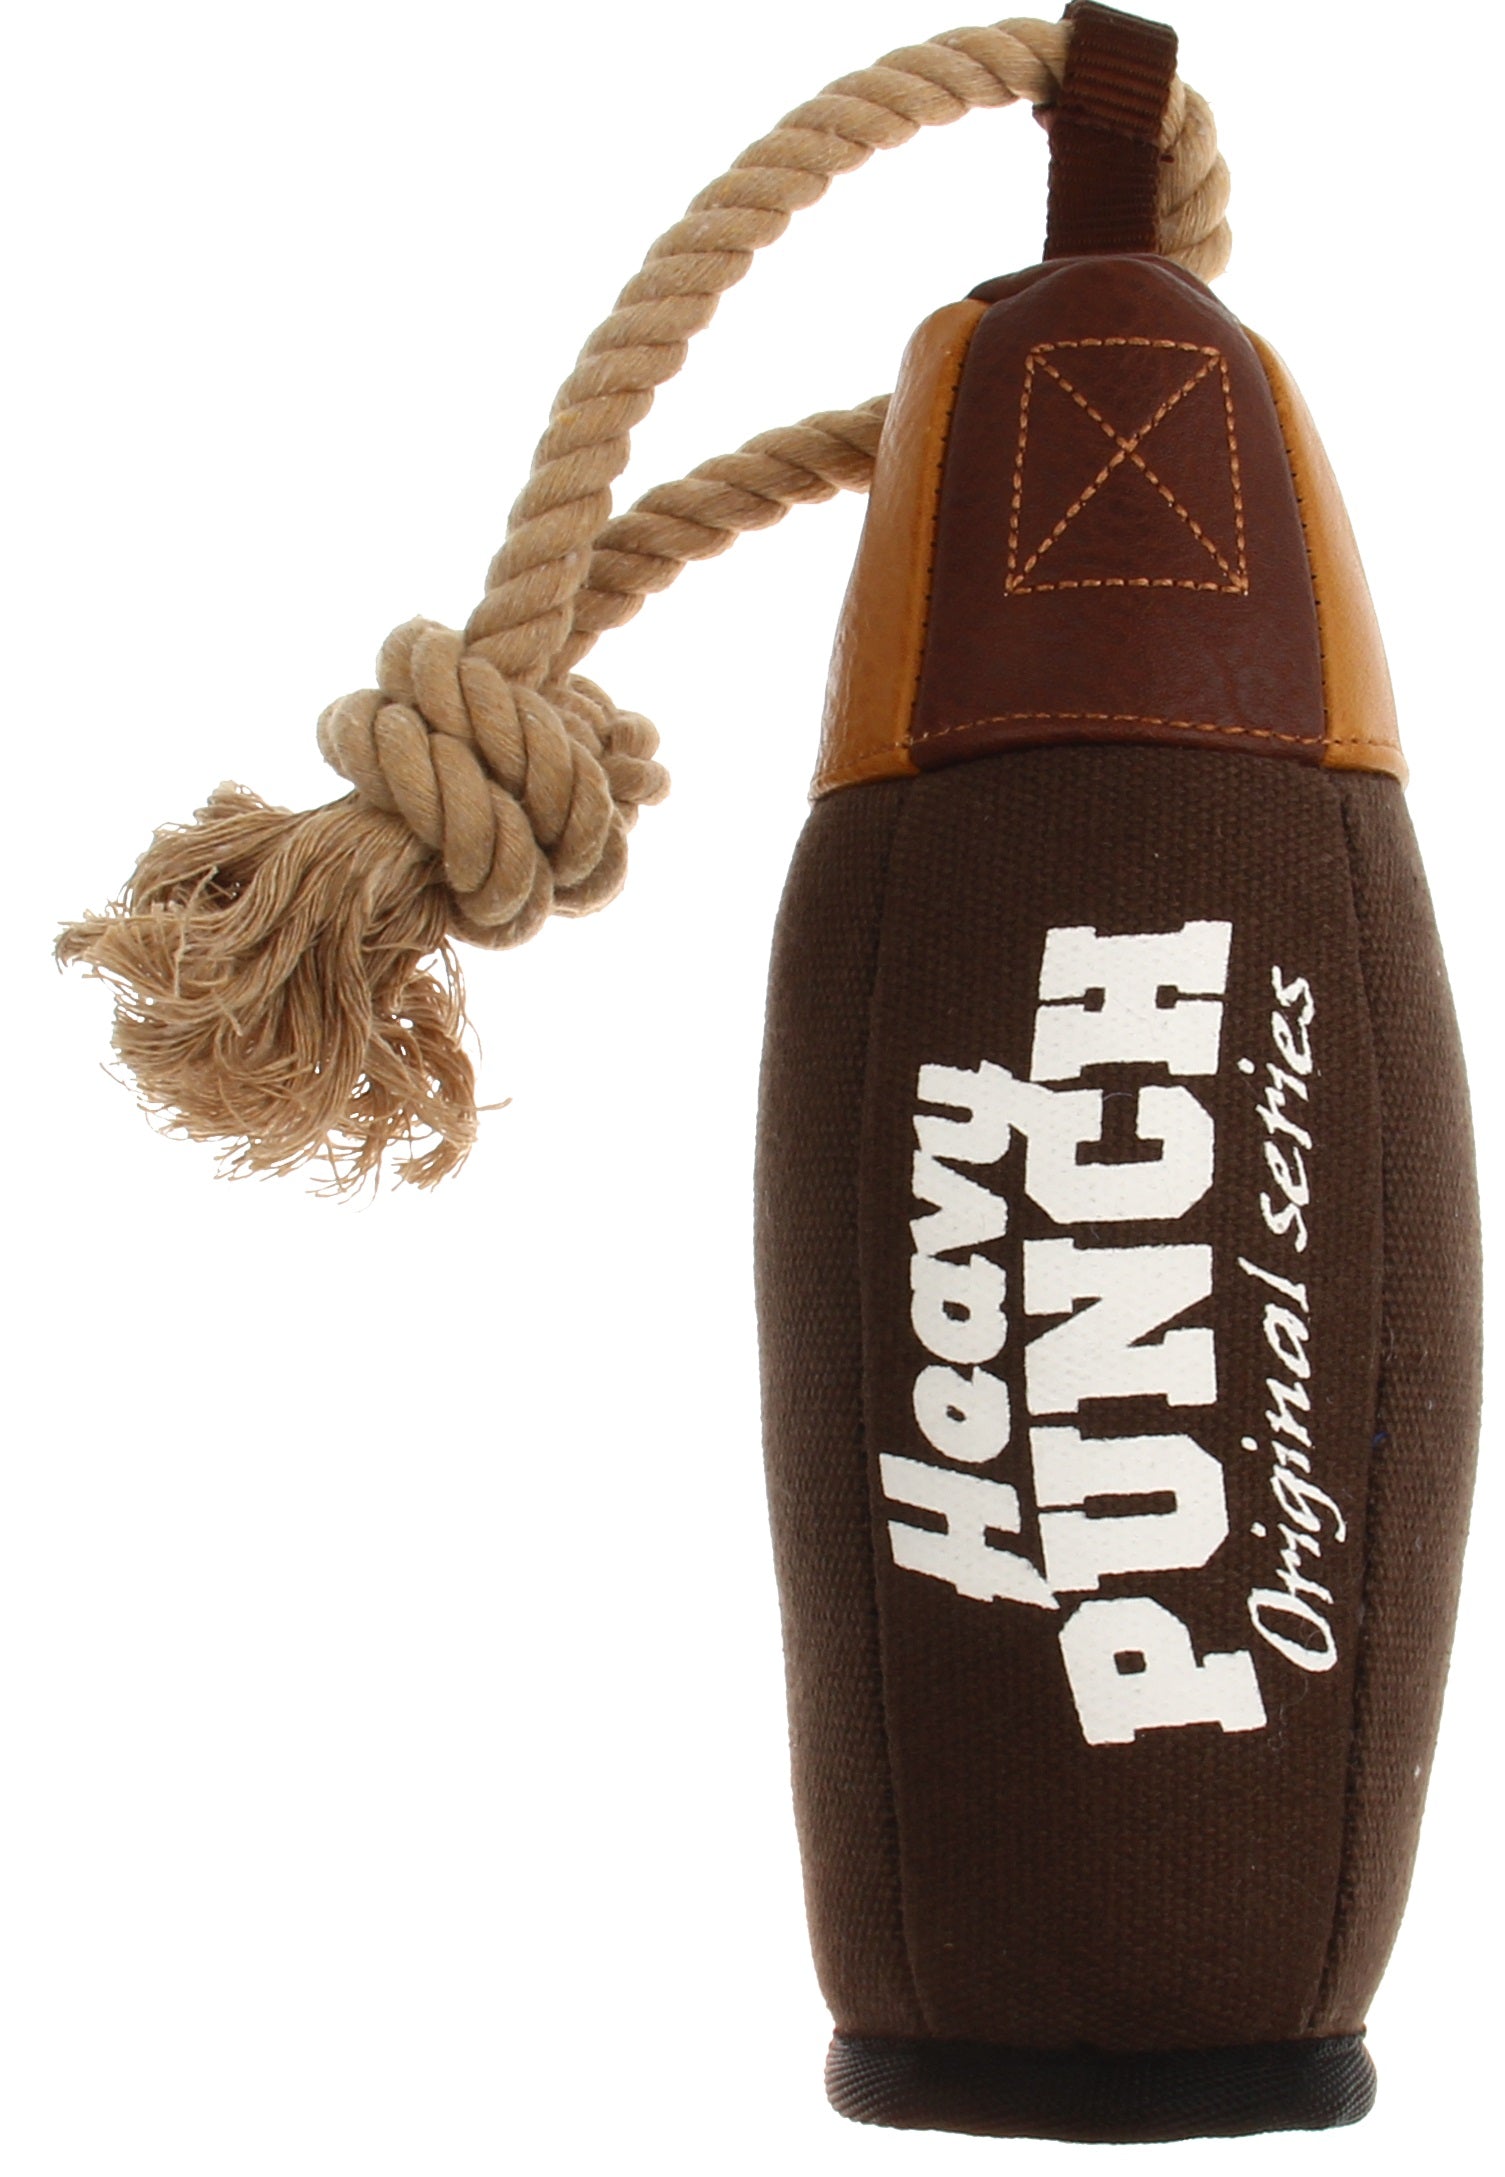 Gigwi Heavy Punching Bag Cotton Rope